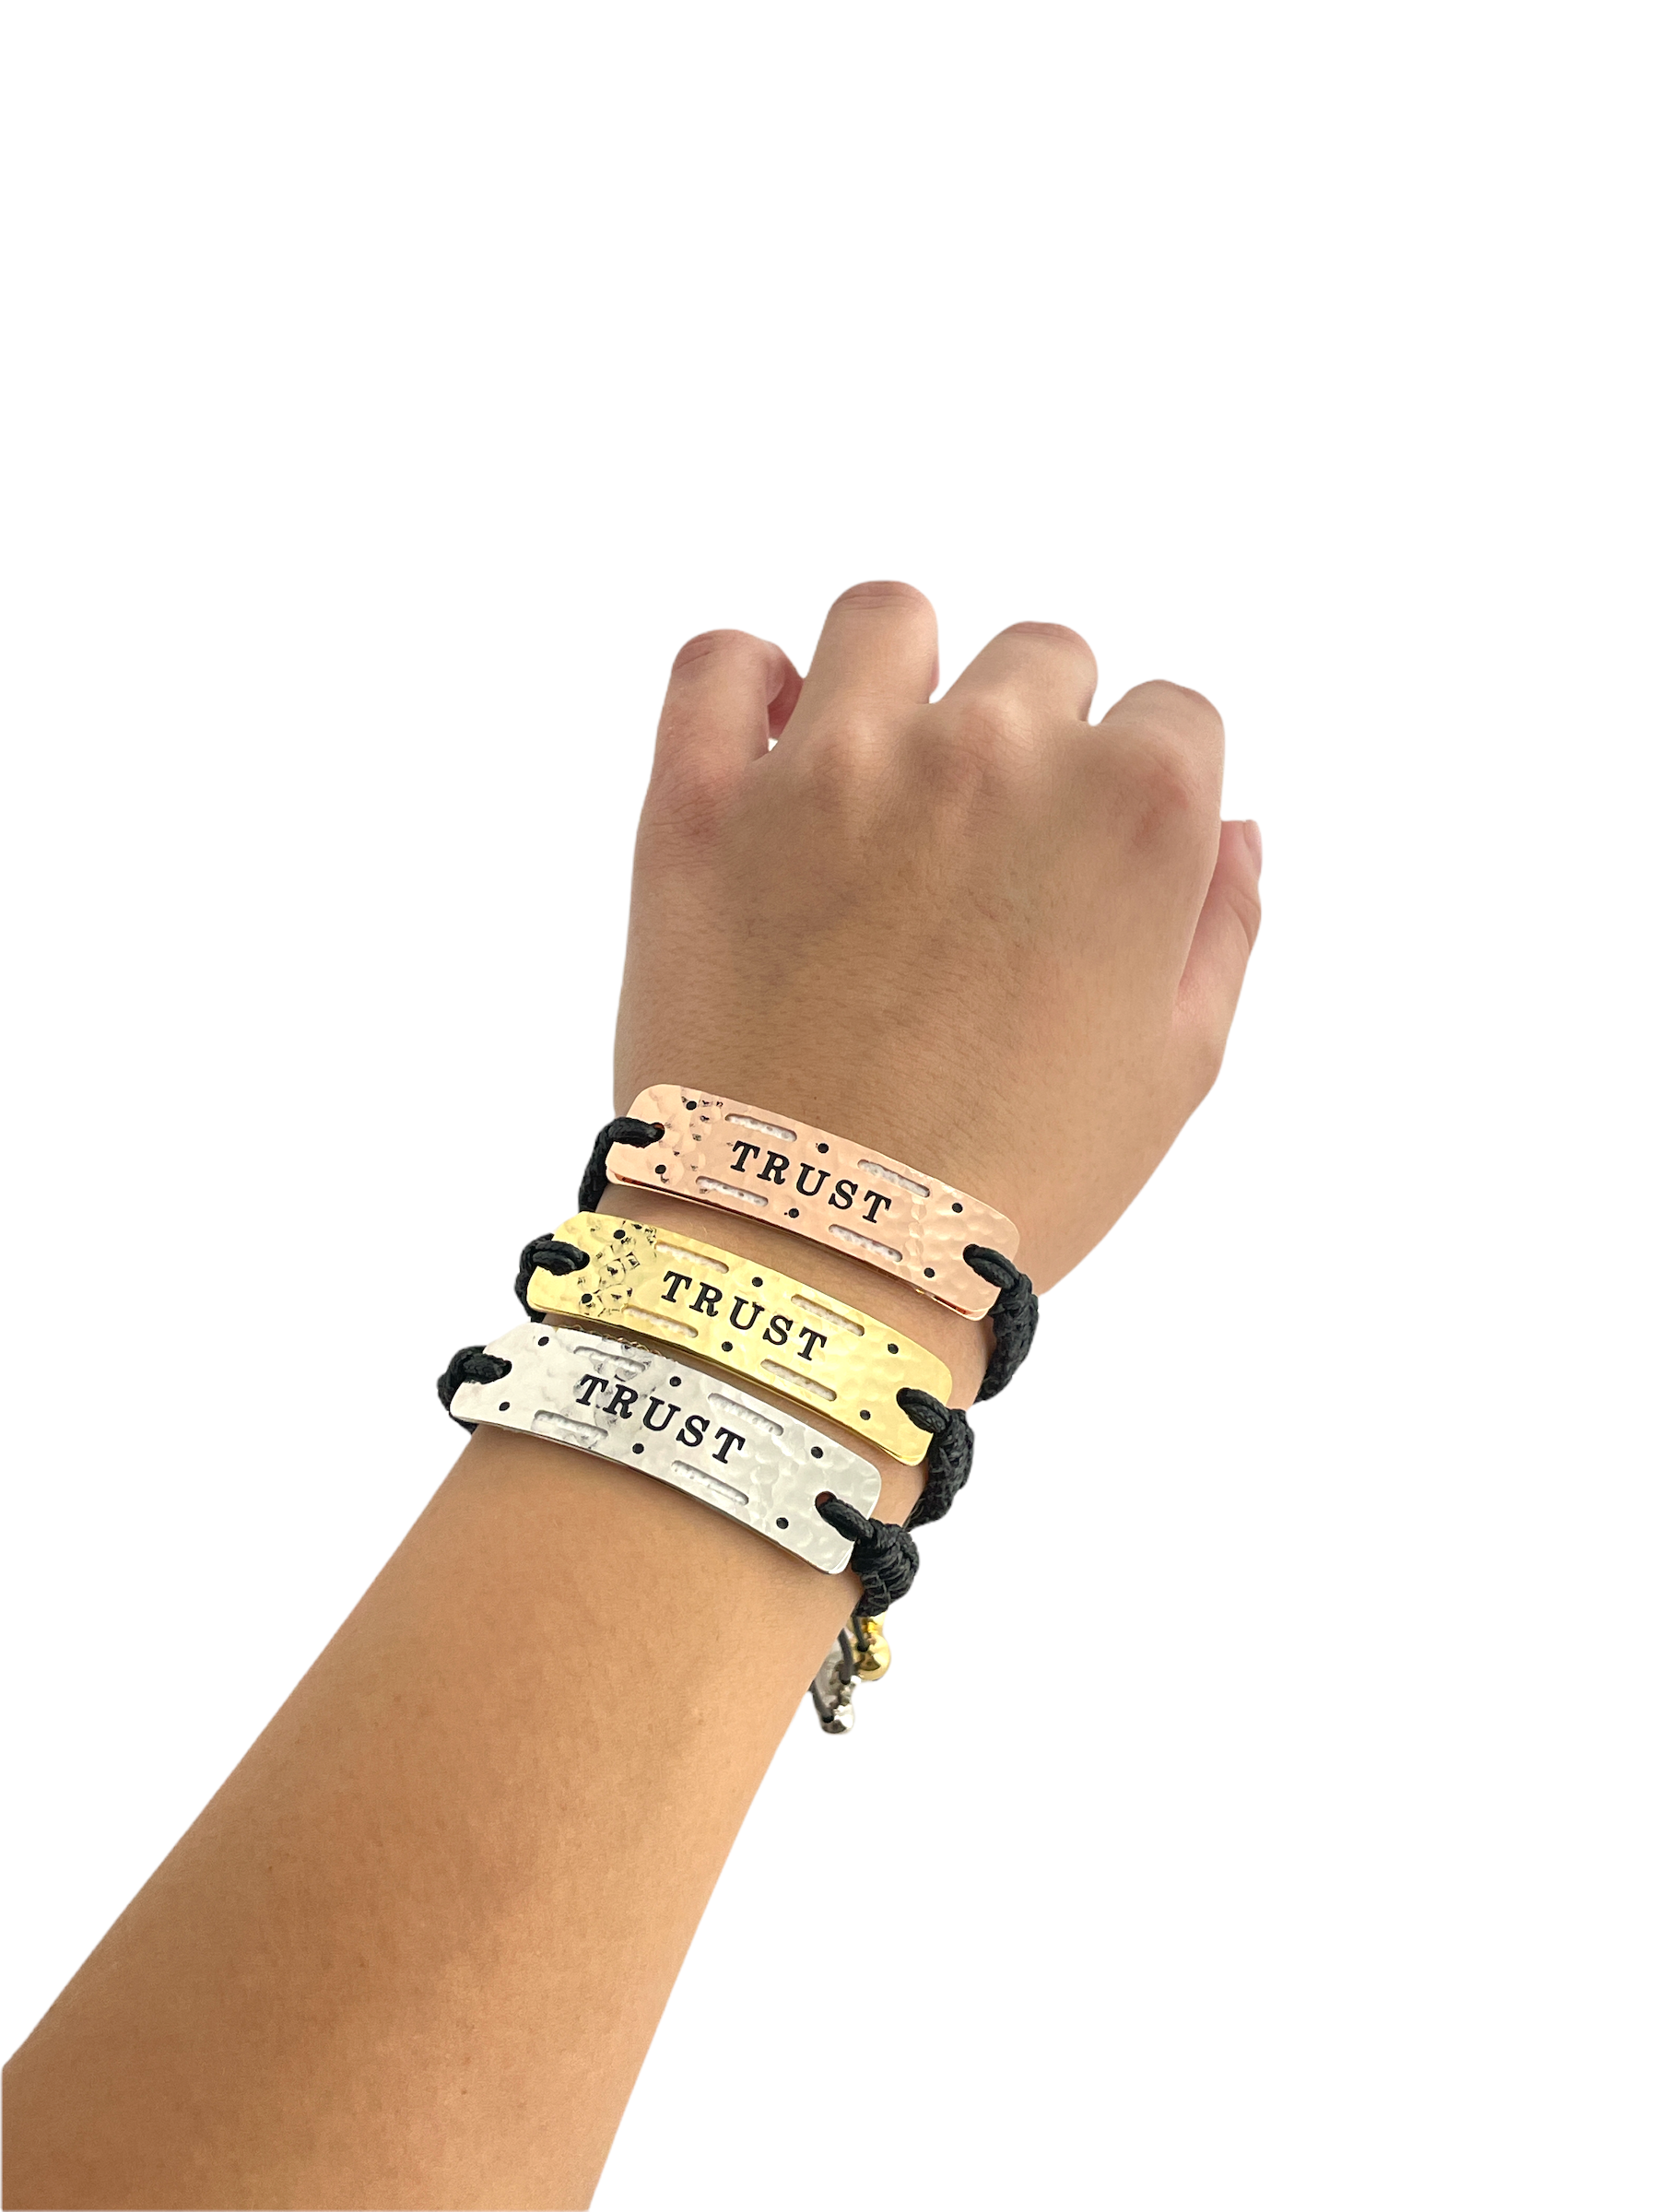 Trust- Vented Power Word Aromatherapy Diffuser Bracelet